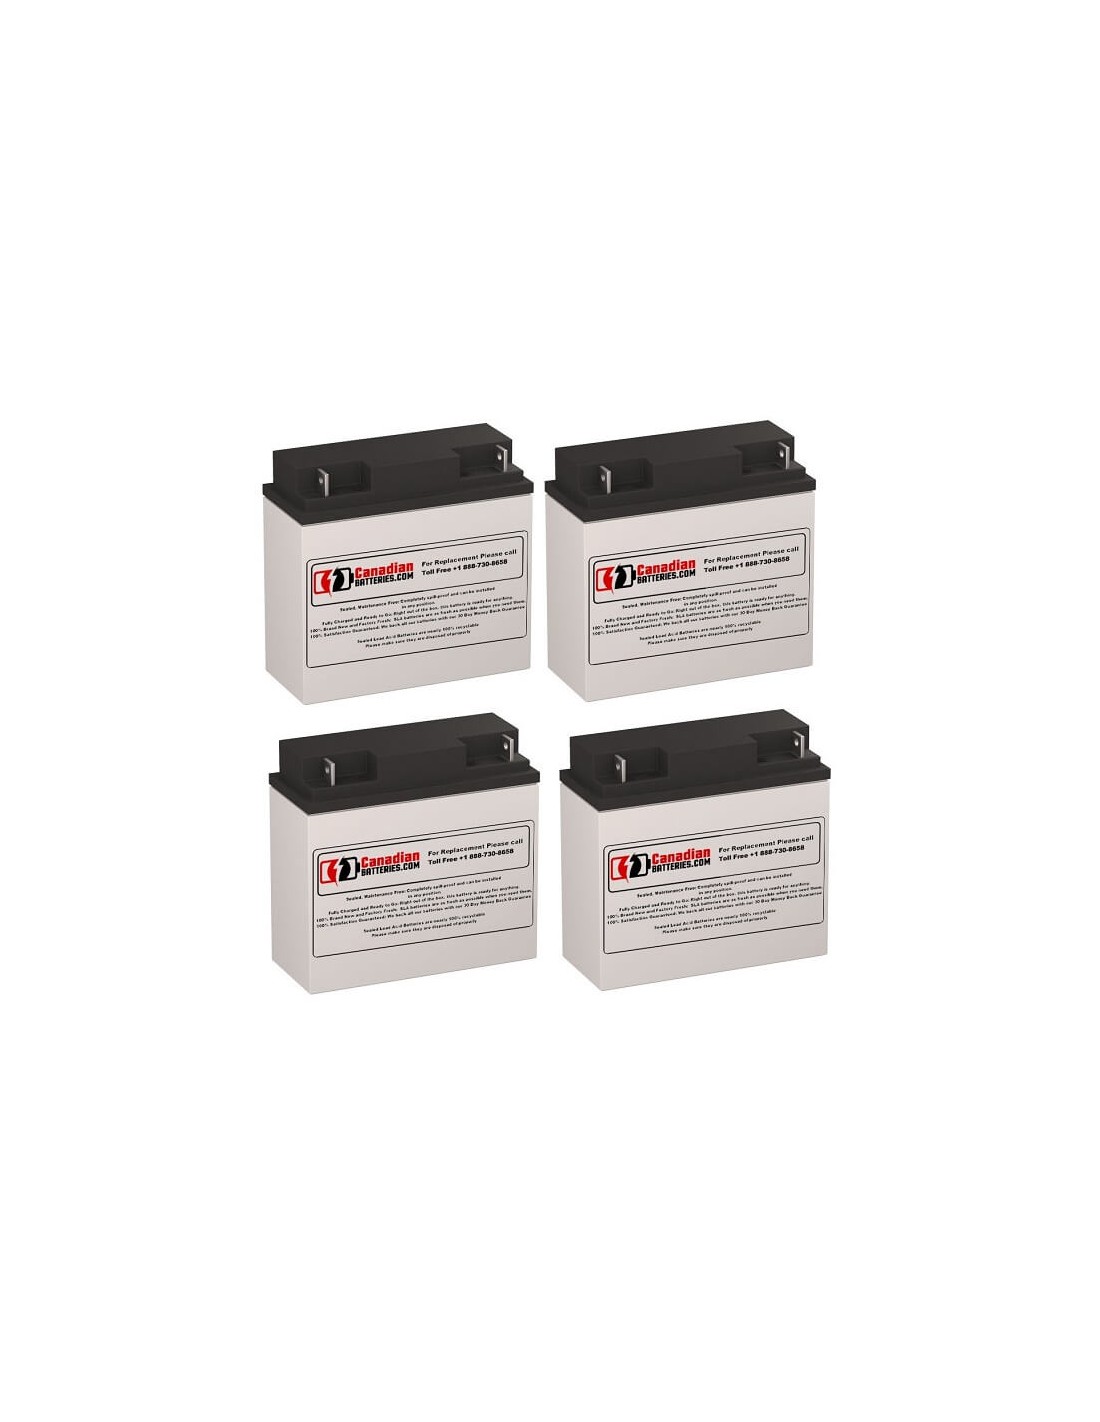 Batteries for Oneac On2000a-sn UPS, 4 x 12V, 18Ah - 216Wh